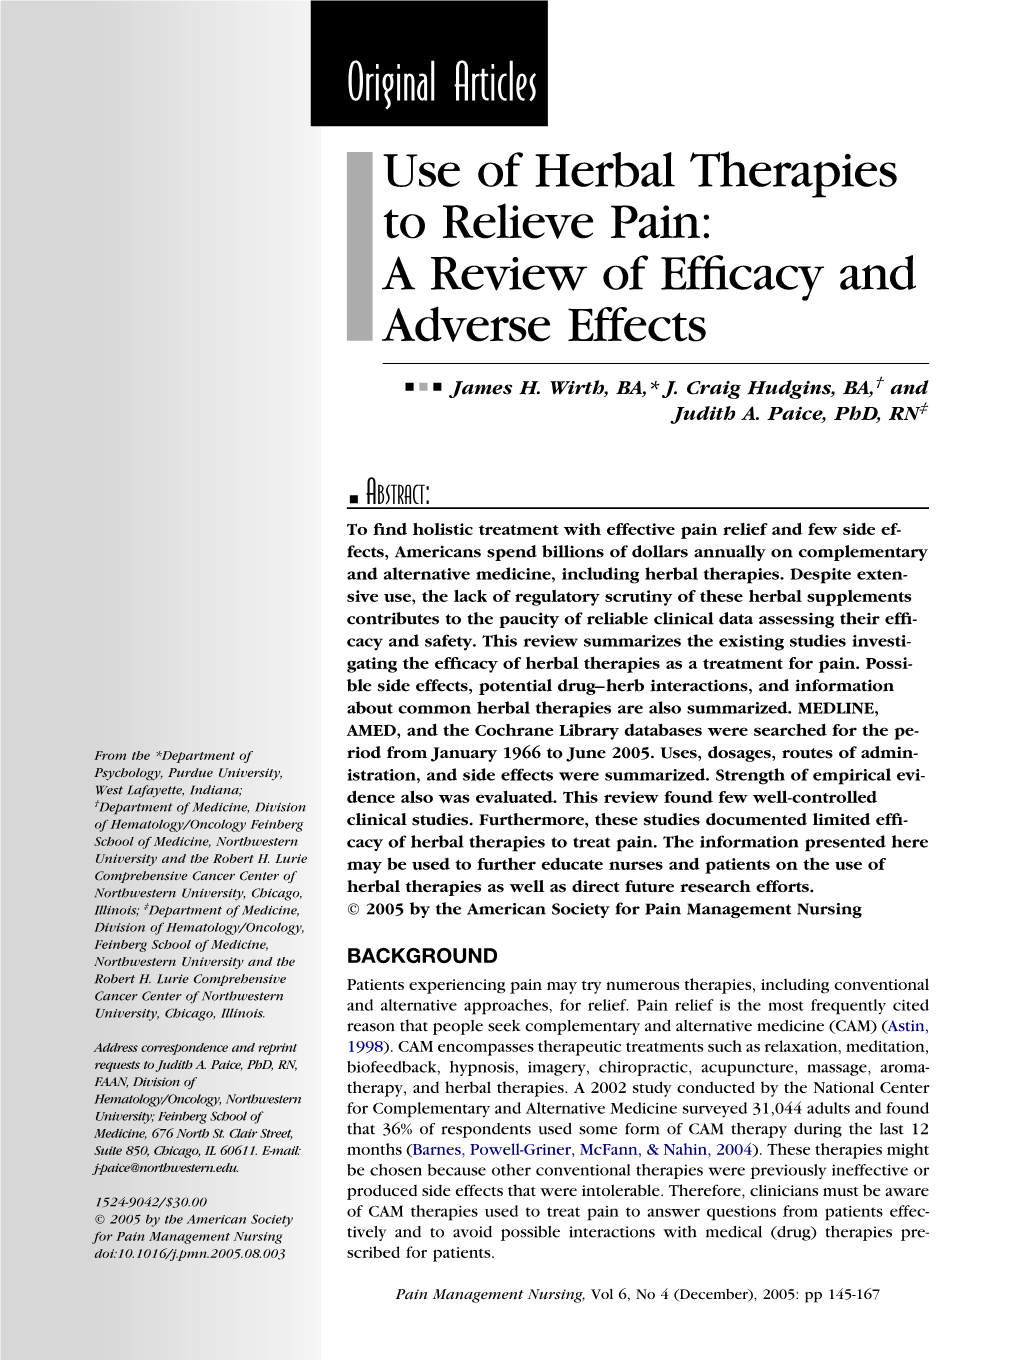 Use of Herbal Therapies to Relieve Pain: a Review of Efficacy and Adverse Effects Original Articles